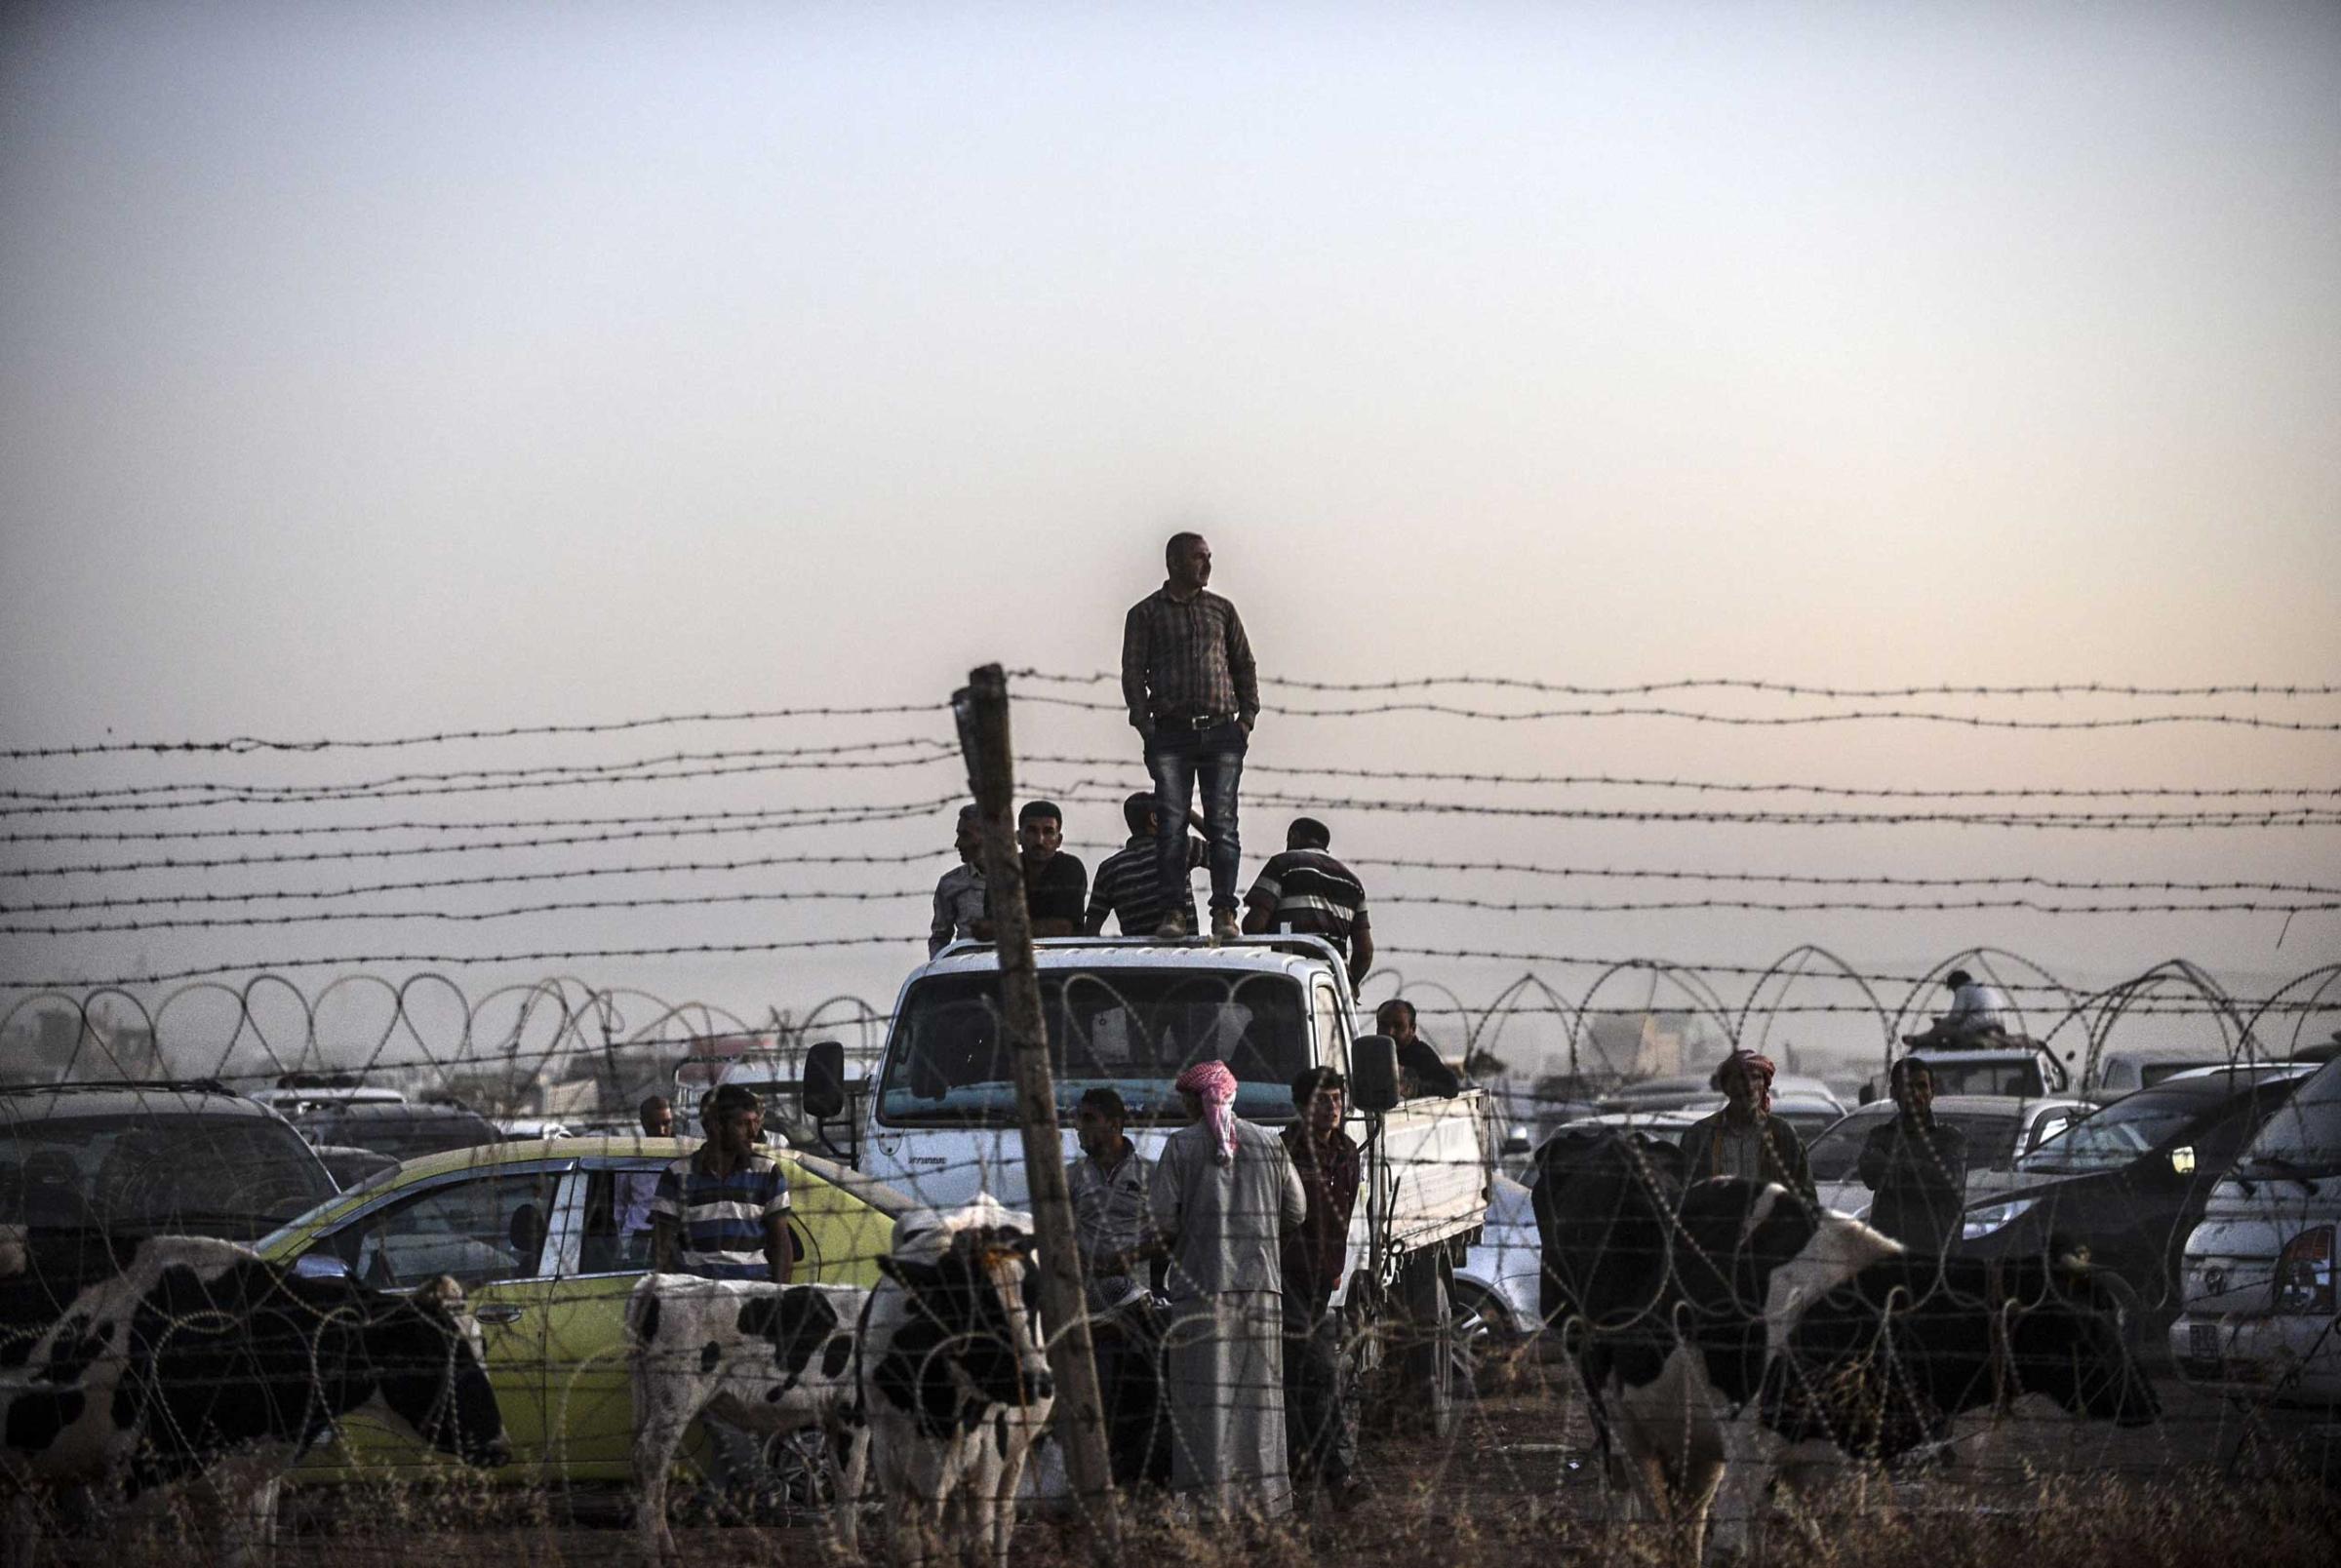 Syrian Kurds wait next to their animals as they stand behind a fence, on the Syrian border in the southeastern town of Suruc in Sanliurfa province, on Sept. 21, 2014.